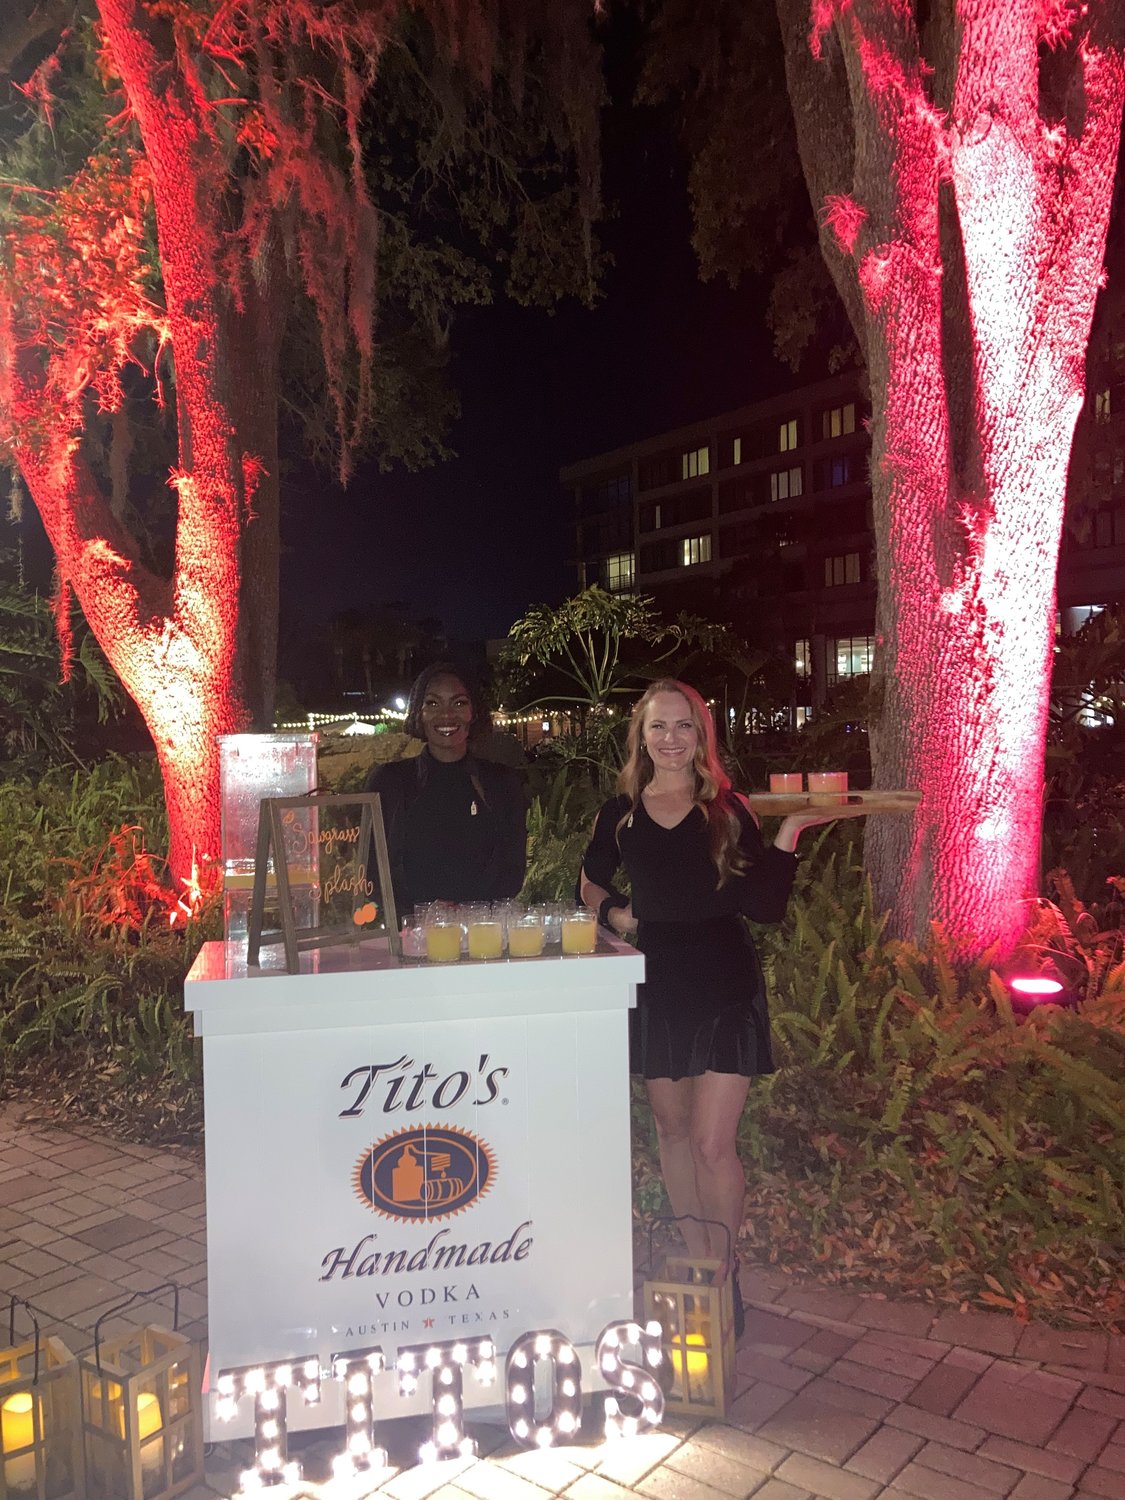 Tito’s Handmade Vodka was available for making the Sawgrass Splash.